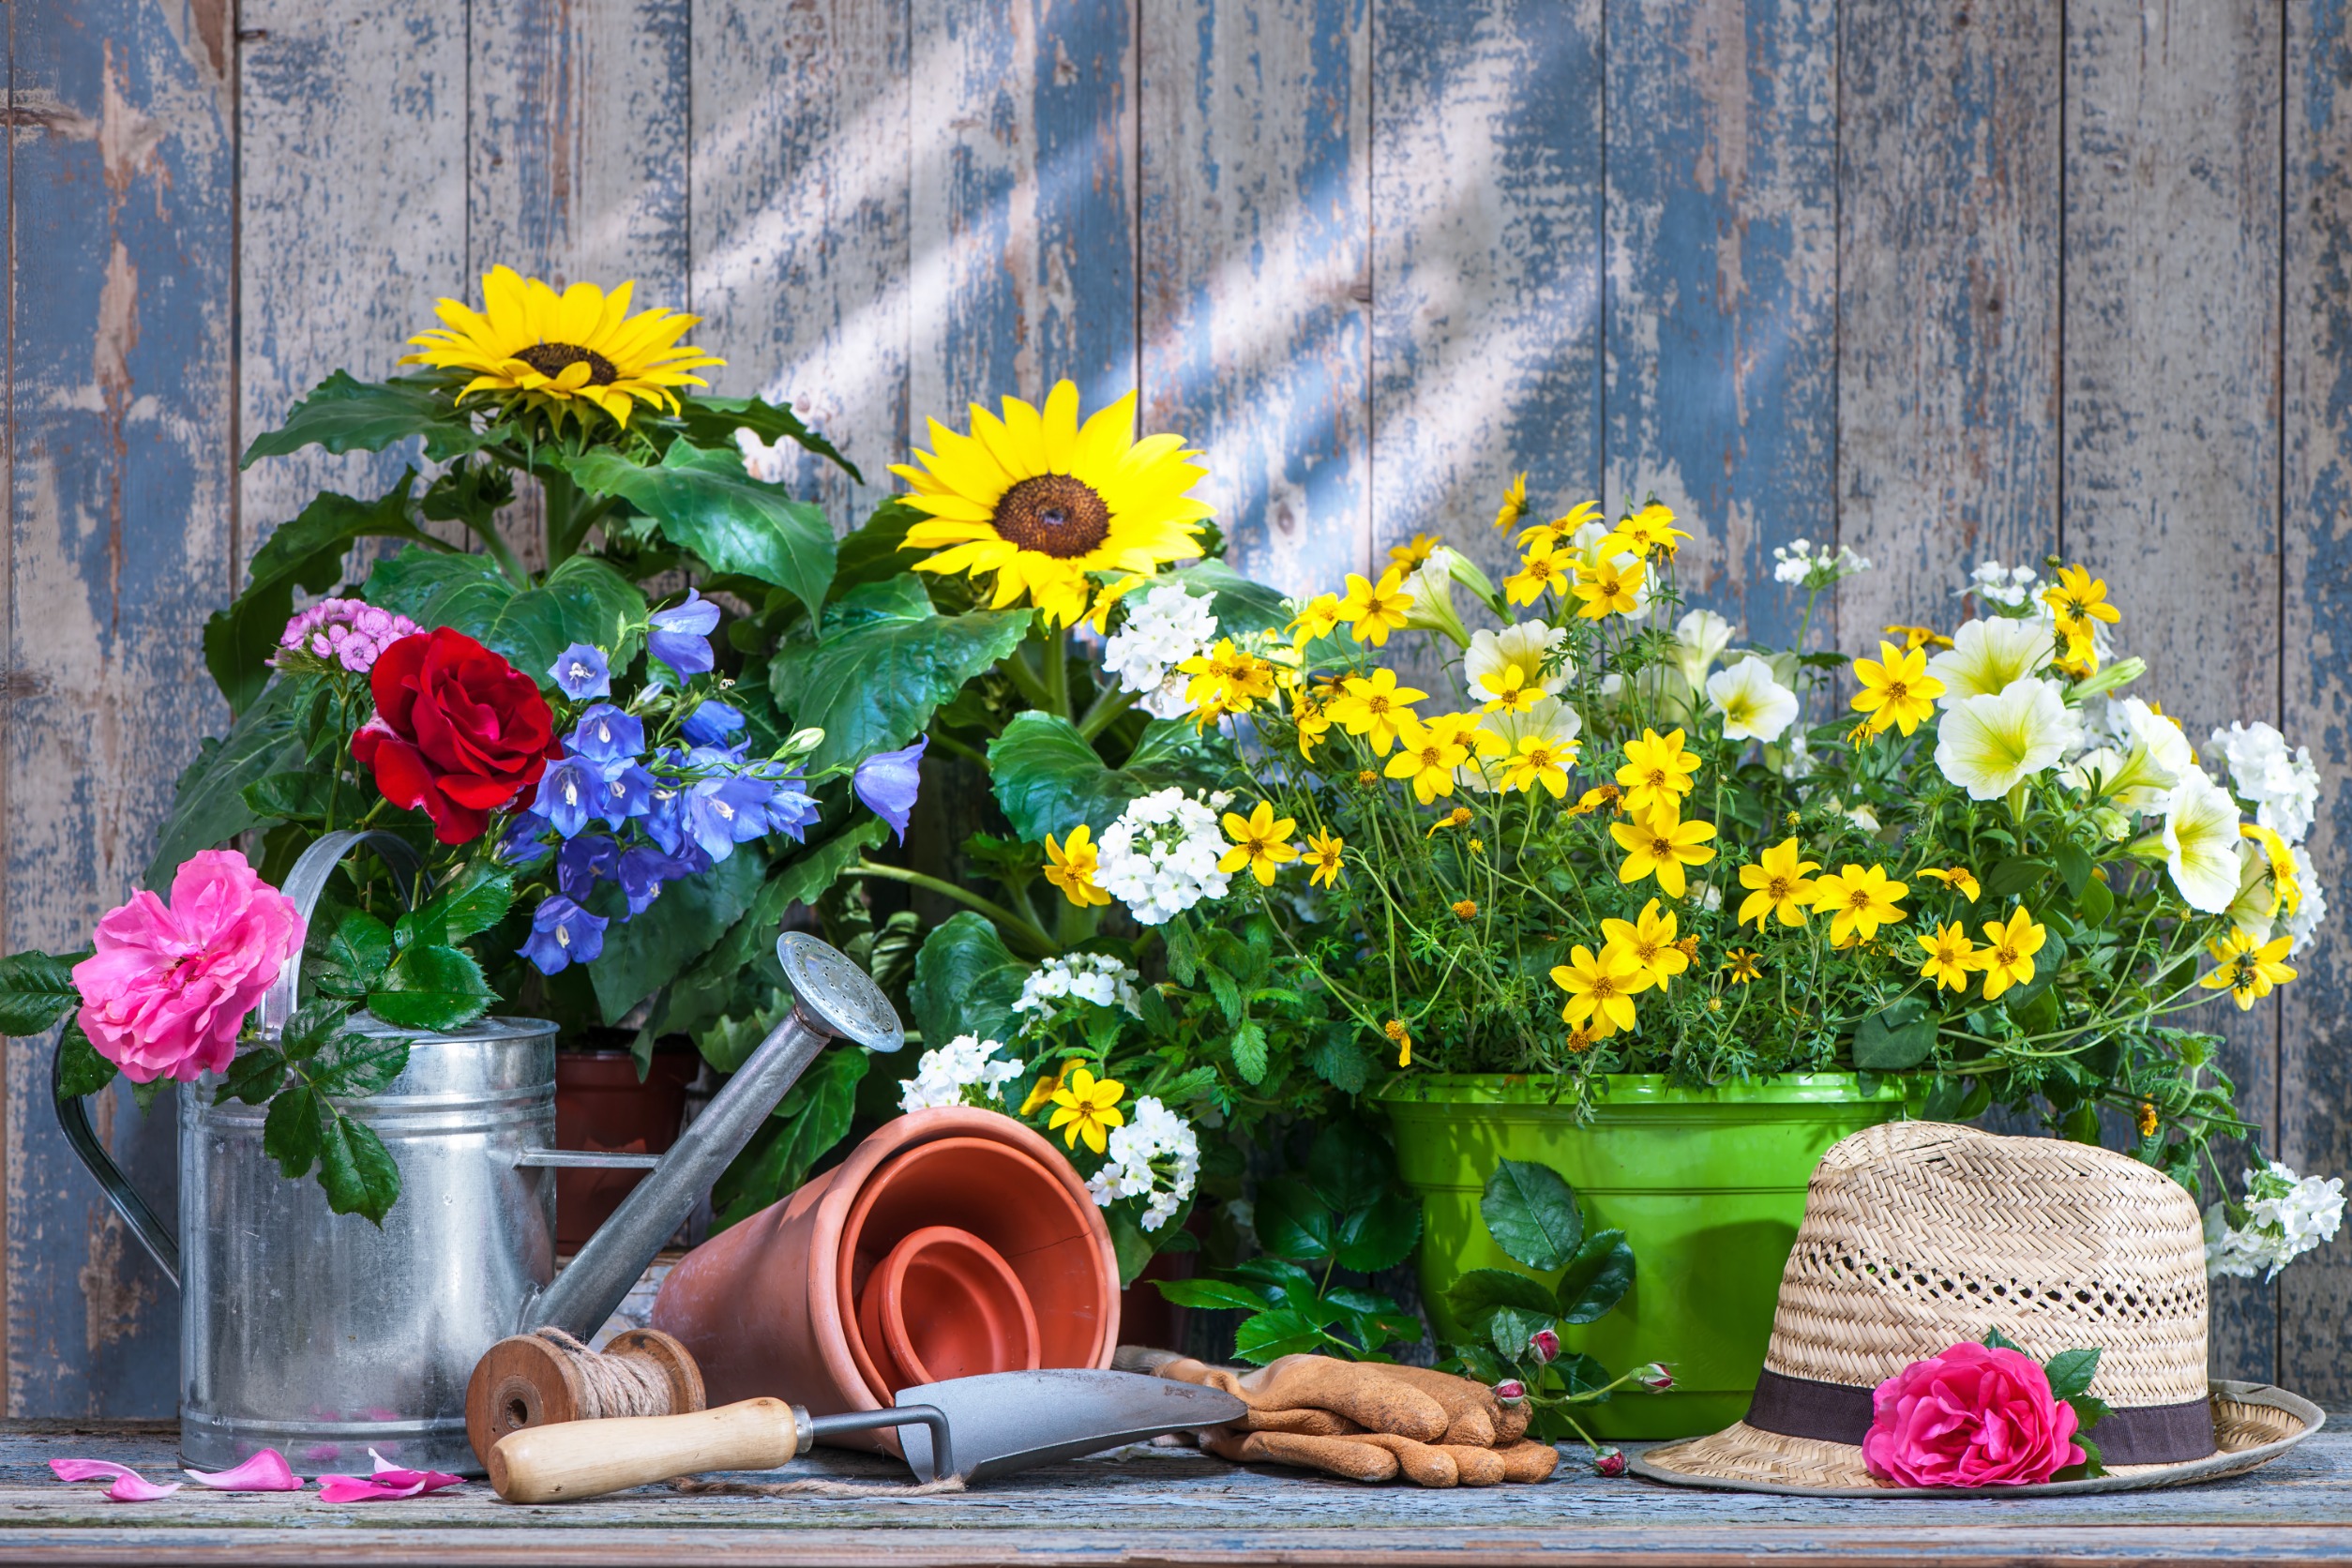 5 Tips to Keep Your Garden Looking Great this Spring and Summer